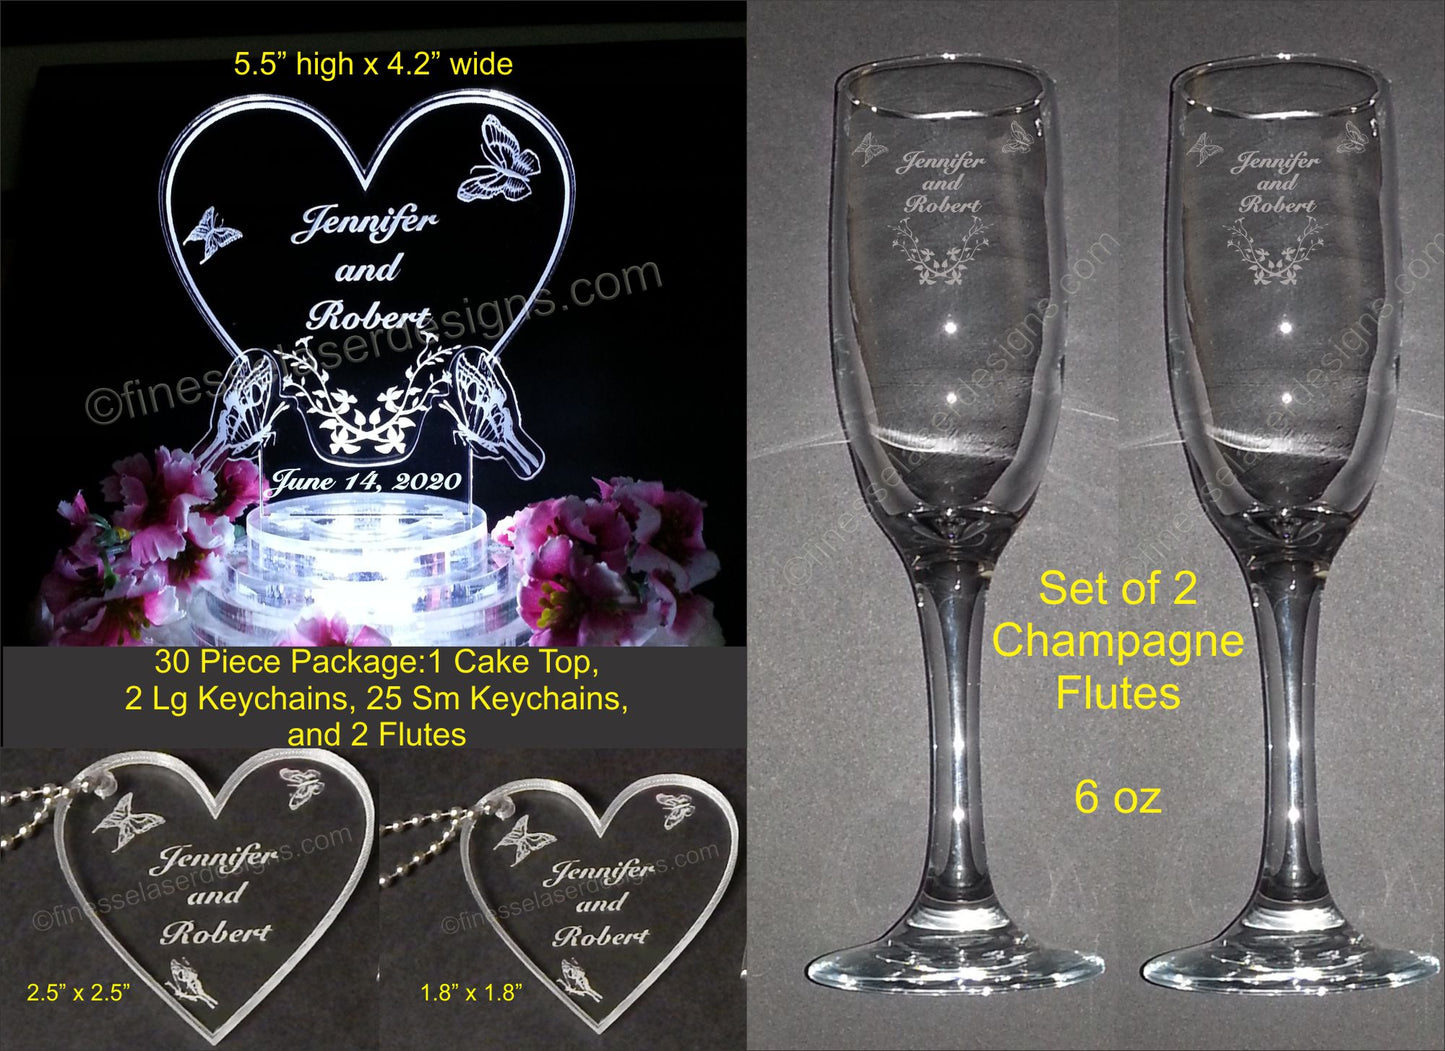 photo showing package items including heart shaped acrylic cake topper decorated with butterflies, 2 sizes of keychain favors, and a set of champagne flutes with dimensions and information